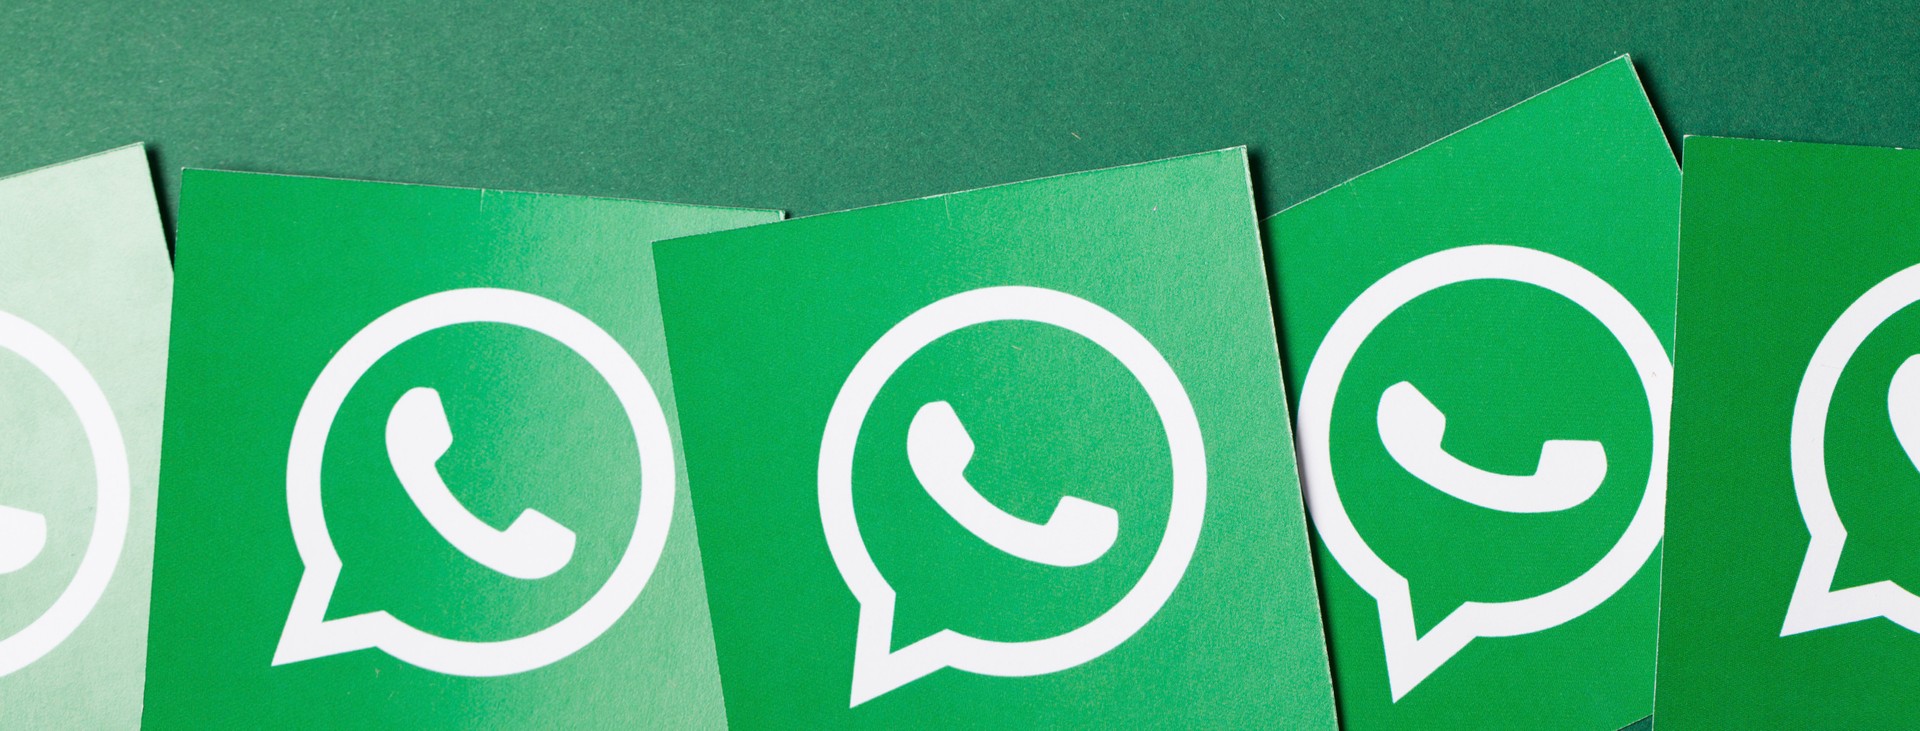 WhatsApp Desktop looks good for Windows 11 with the new app